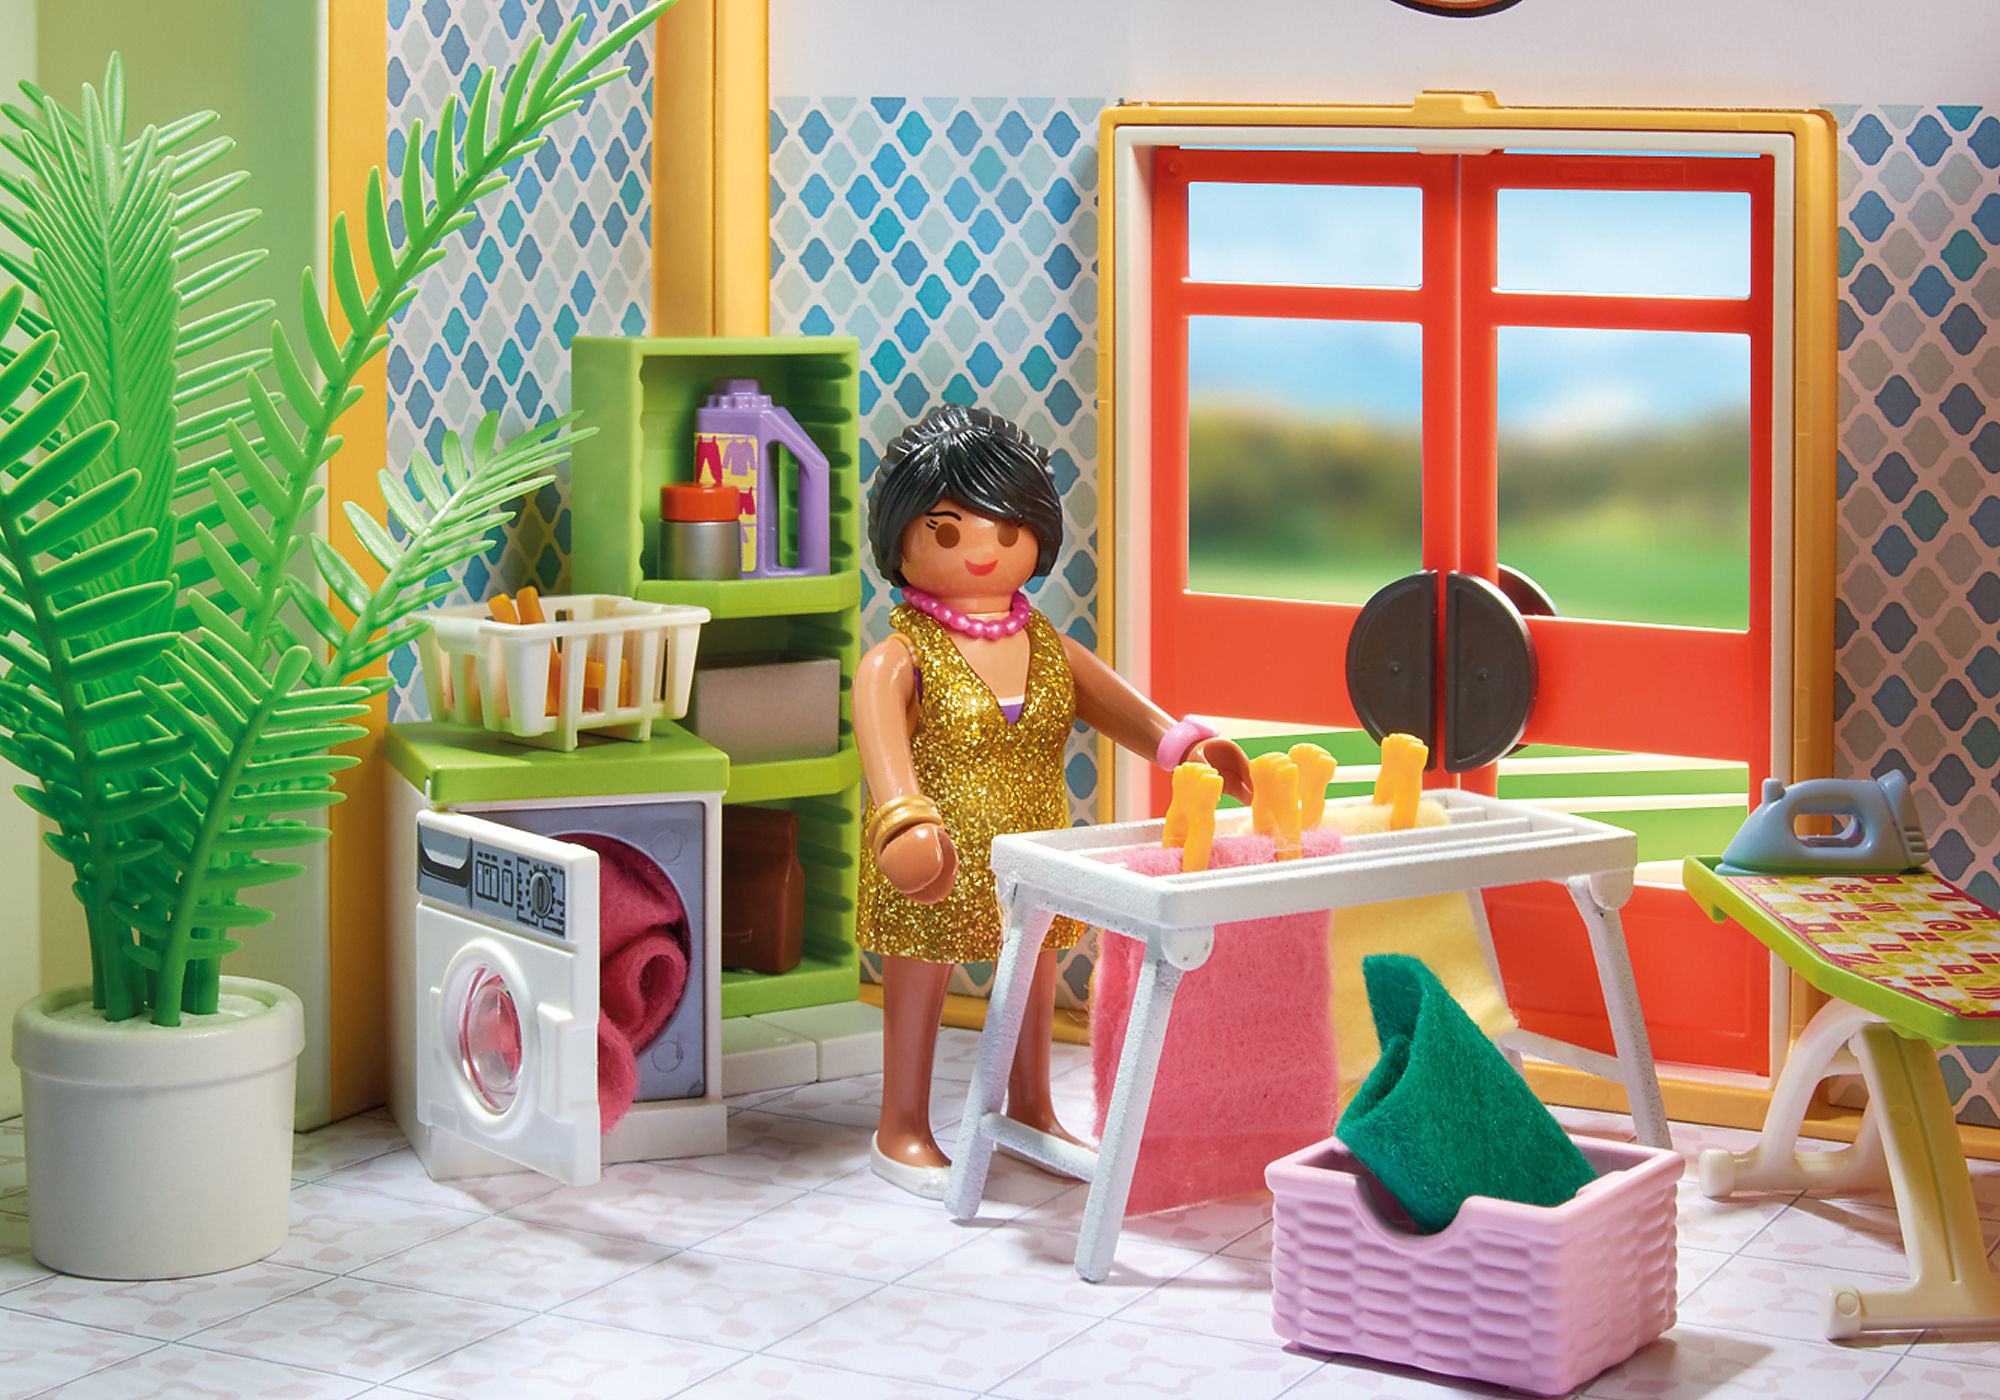 a playmobil set with a mid - century modern house, Stable Diffusion